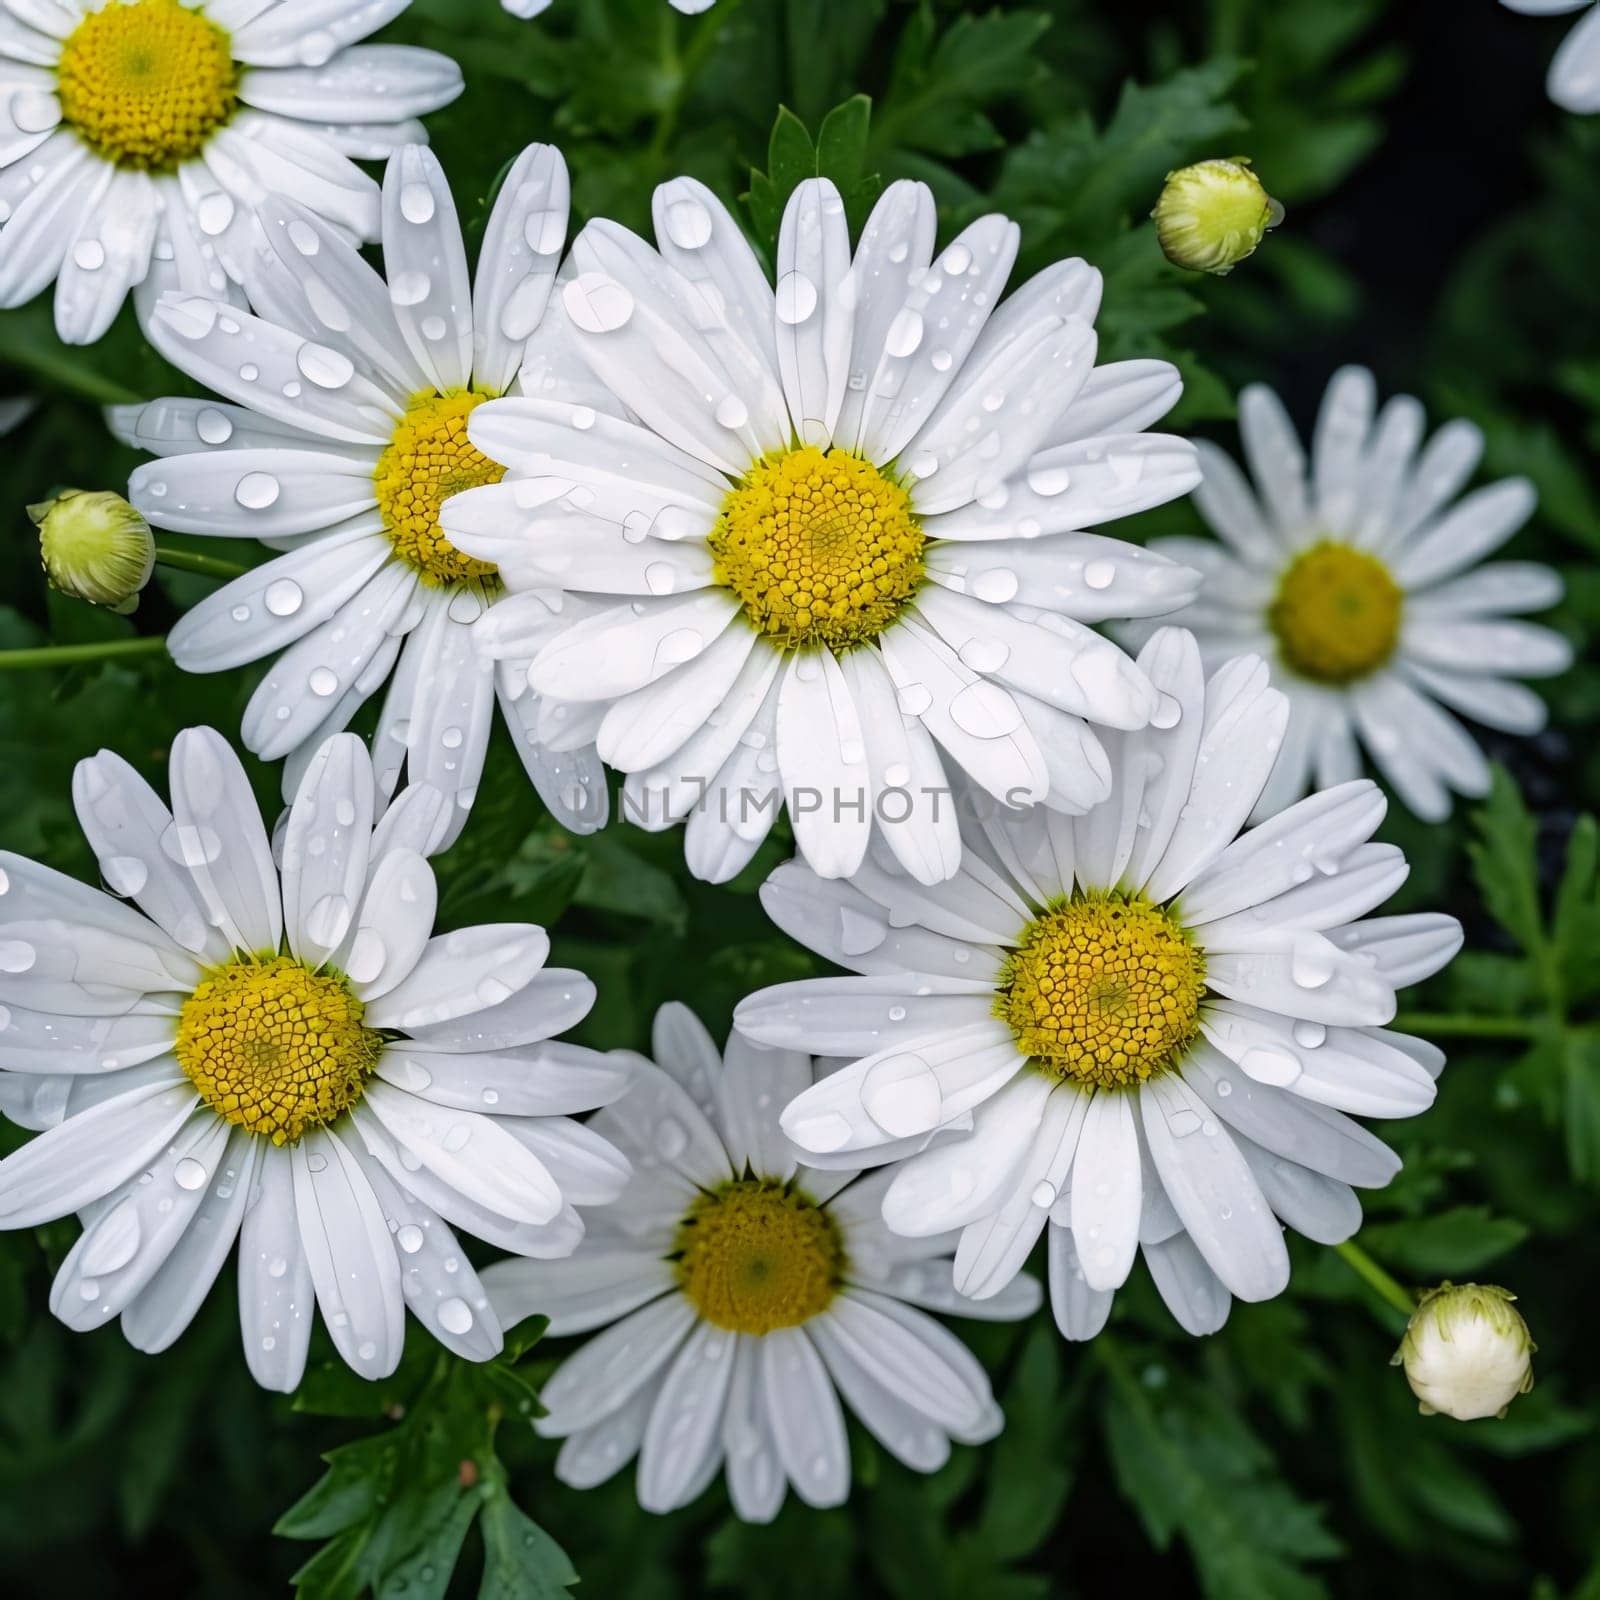 White daisies with green leaves in a field, close-up view. Drops of dew, rain, water on the petals. Flowering flowers, a symbol of spring, new life. by ThemesS